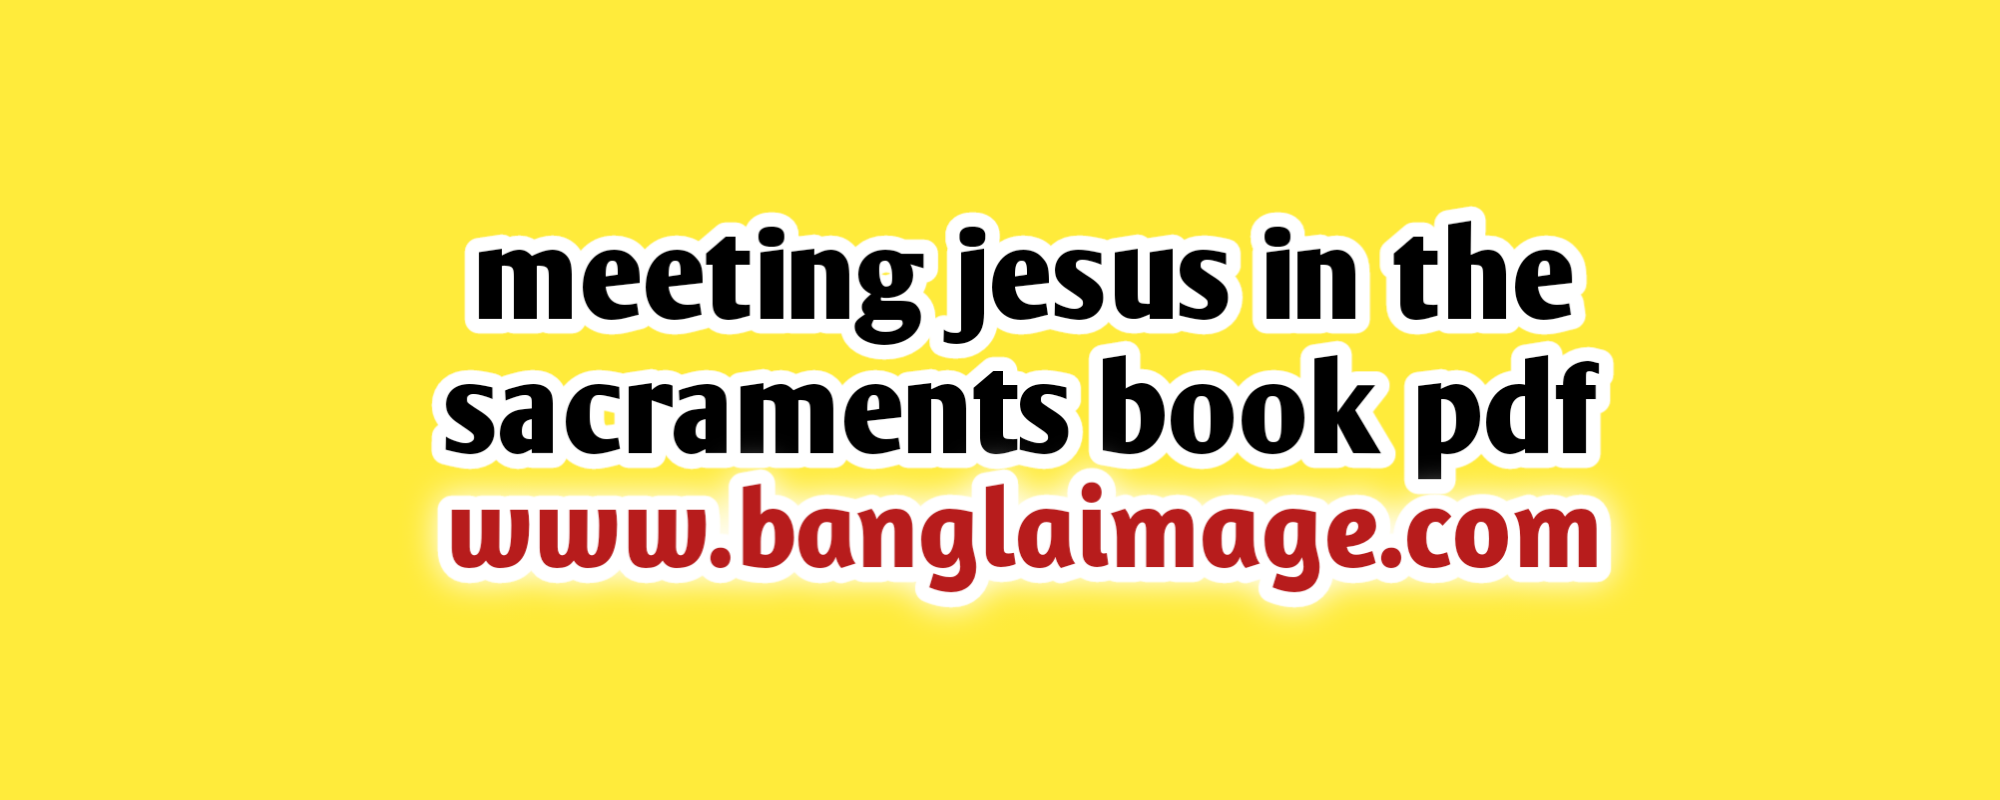 meeting jesus in the sacraments book pdf, meeting jesus in the sacraments book pdf drive file, meeting jesus in the sacraments book pdf now, the meeting jesus in the sacraments book pdf drive file